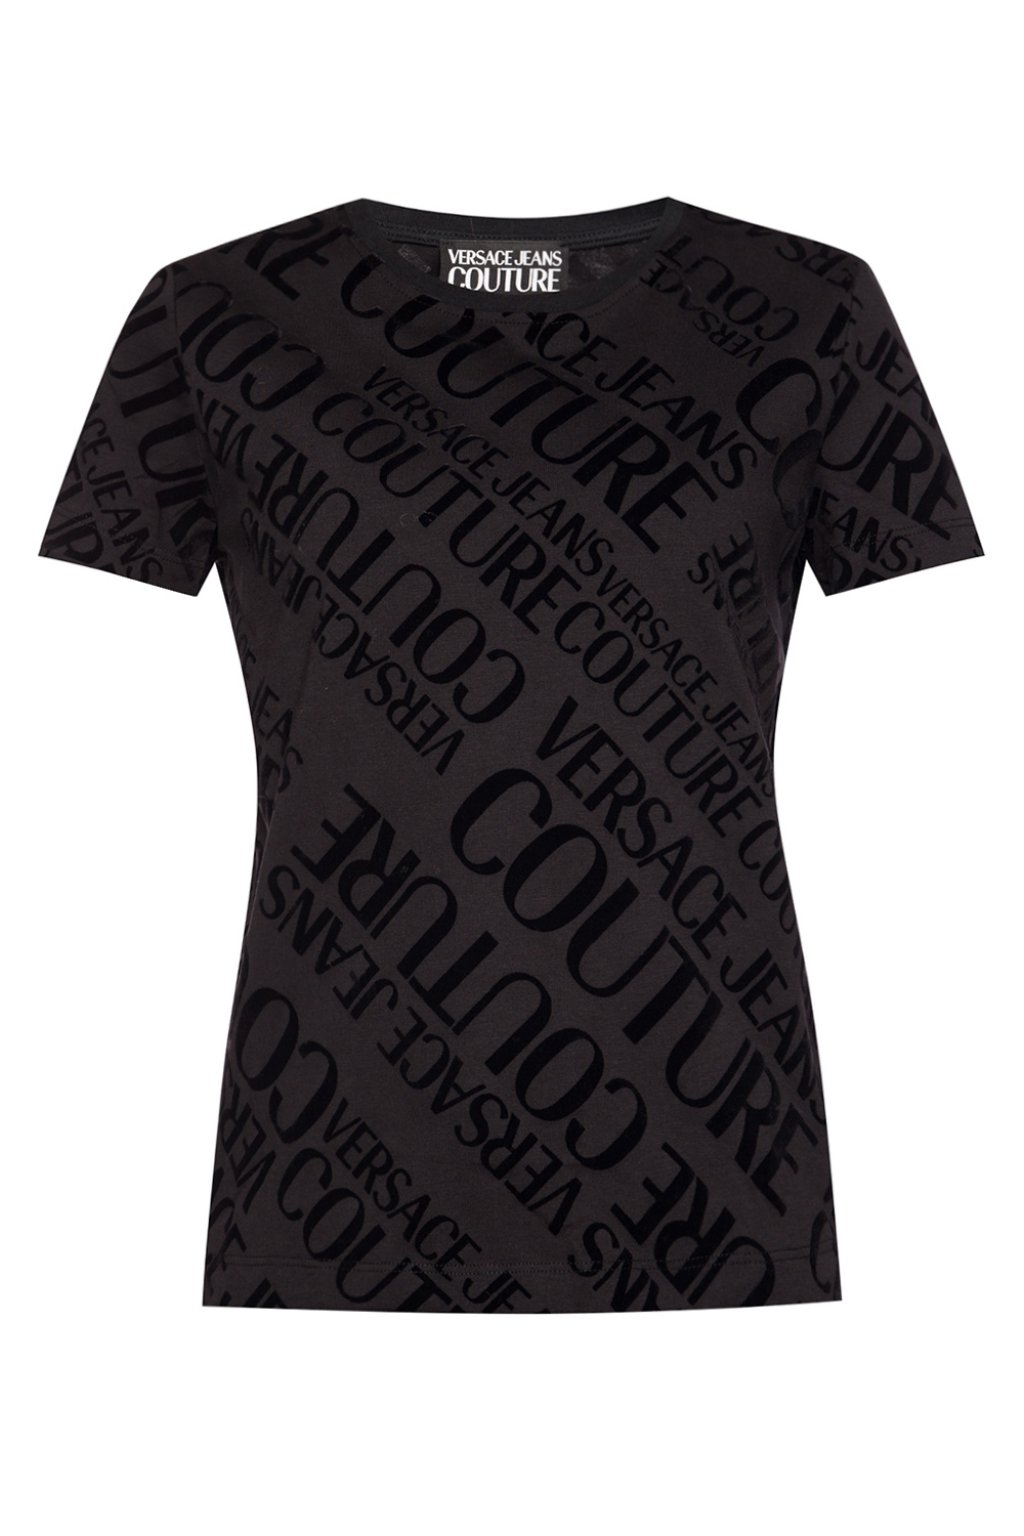 Versace Jeans Couture Patterned T-shirt | Women's Clothing | Vitkac